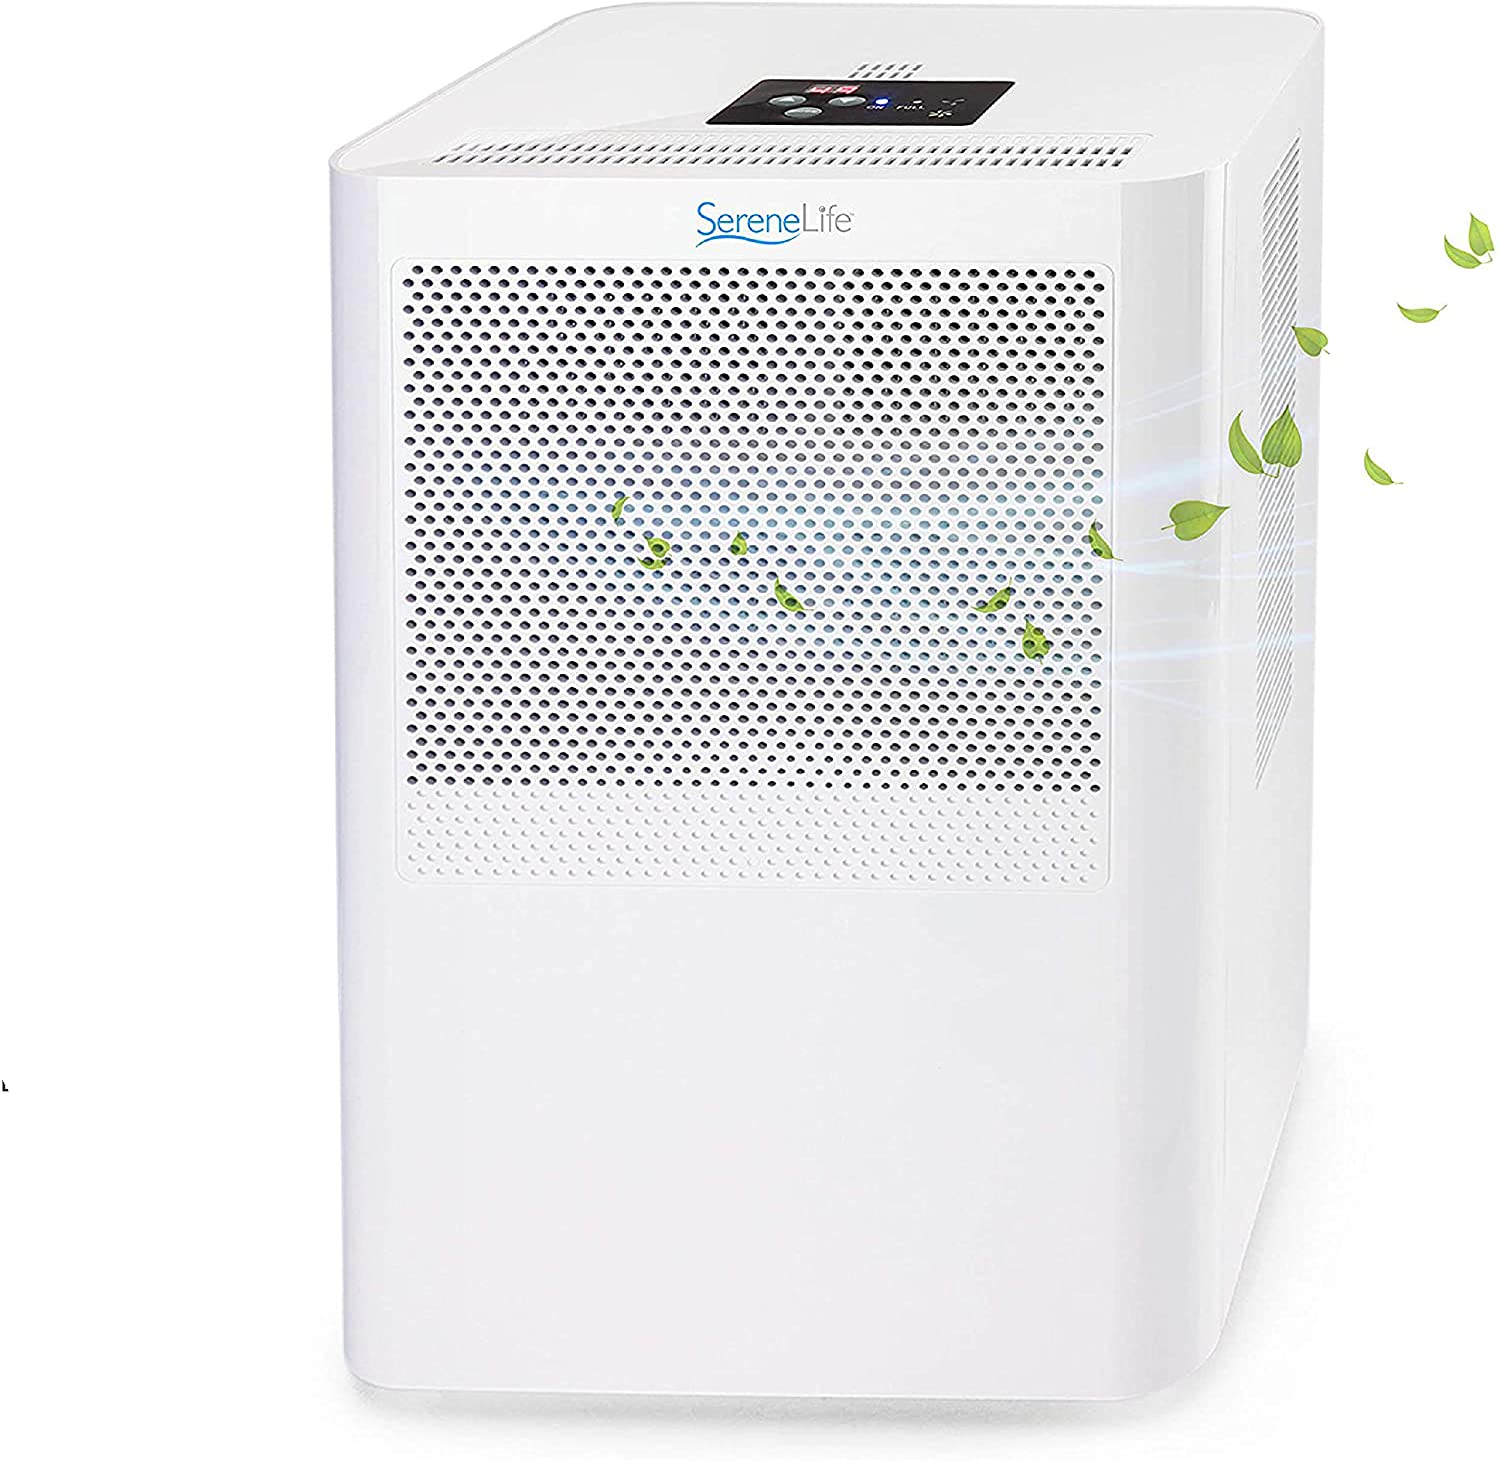 SereneLife PDUMID95 Home Mini Dehumidifier (up to 322sqft) $58 + free s/h at Amazon